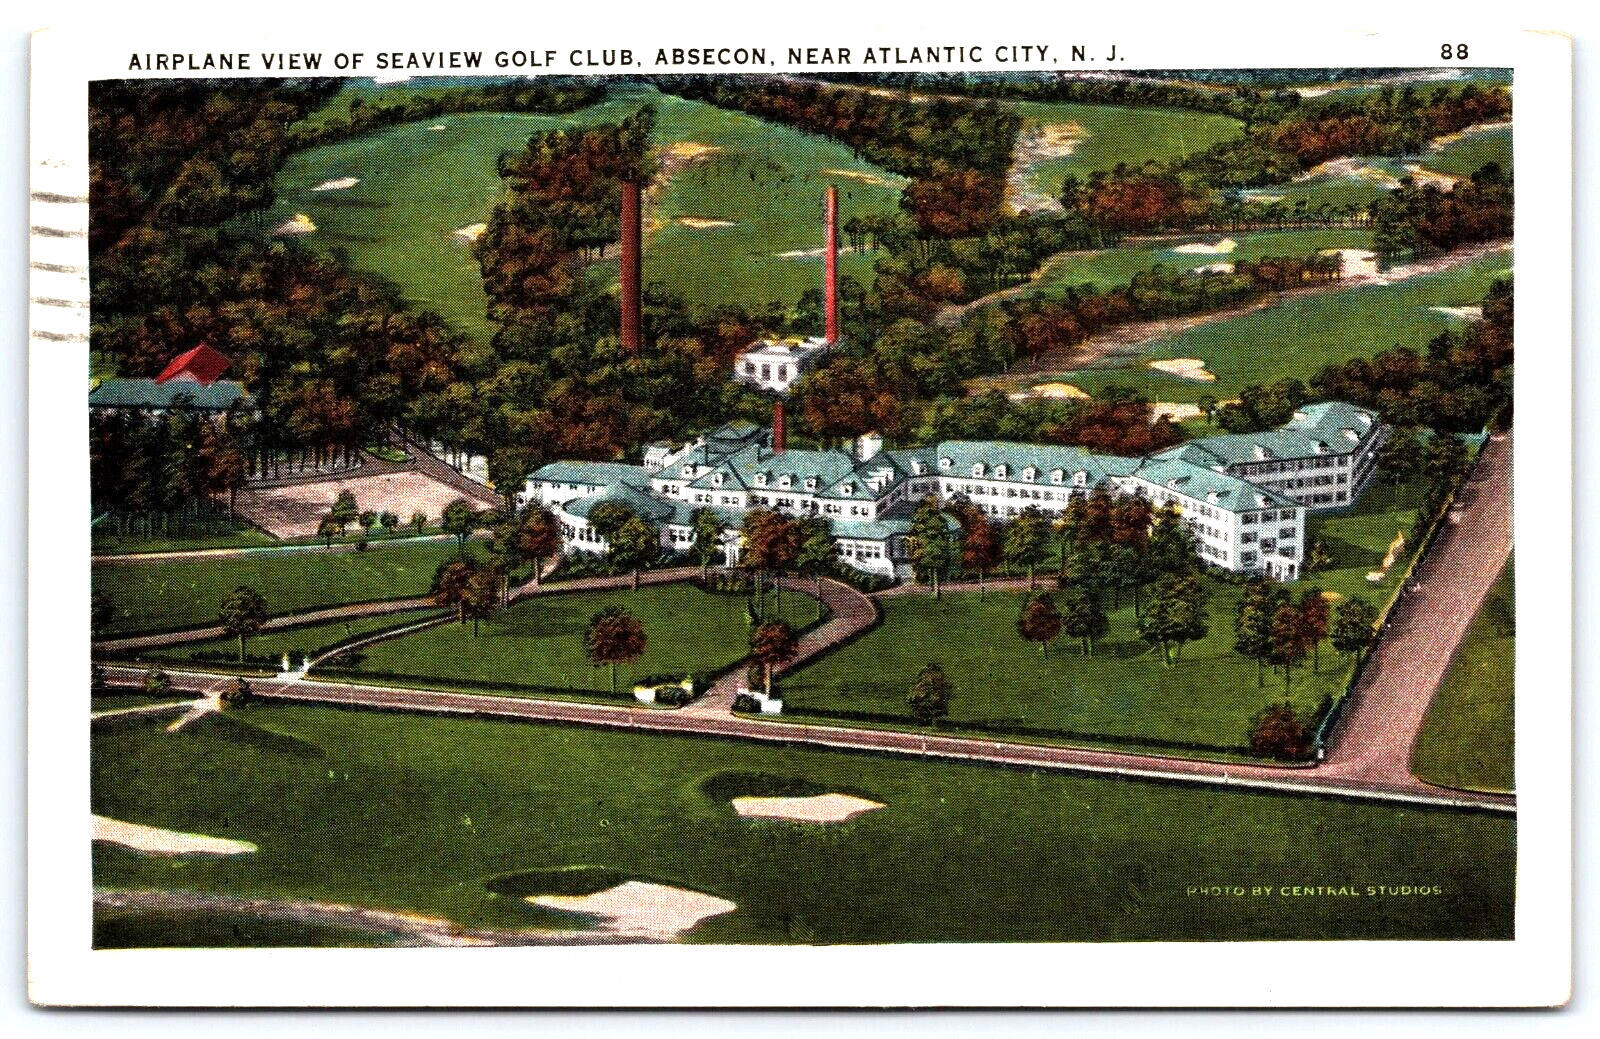 Postcards 1934 Aerial View Seaview Golf Club Absecon Atlantic City NJ A11